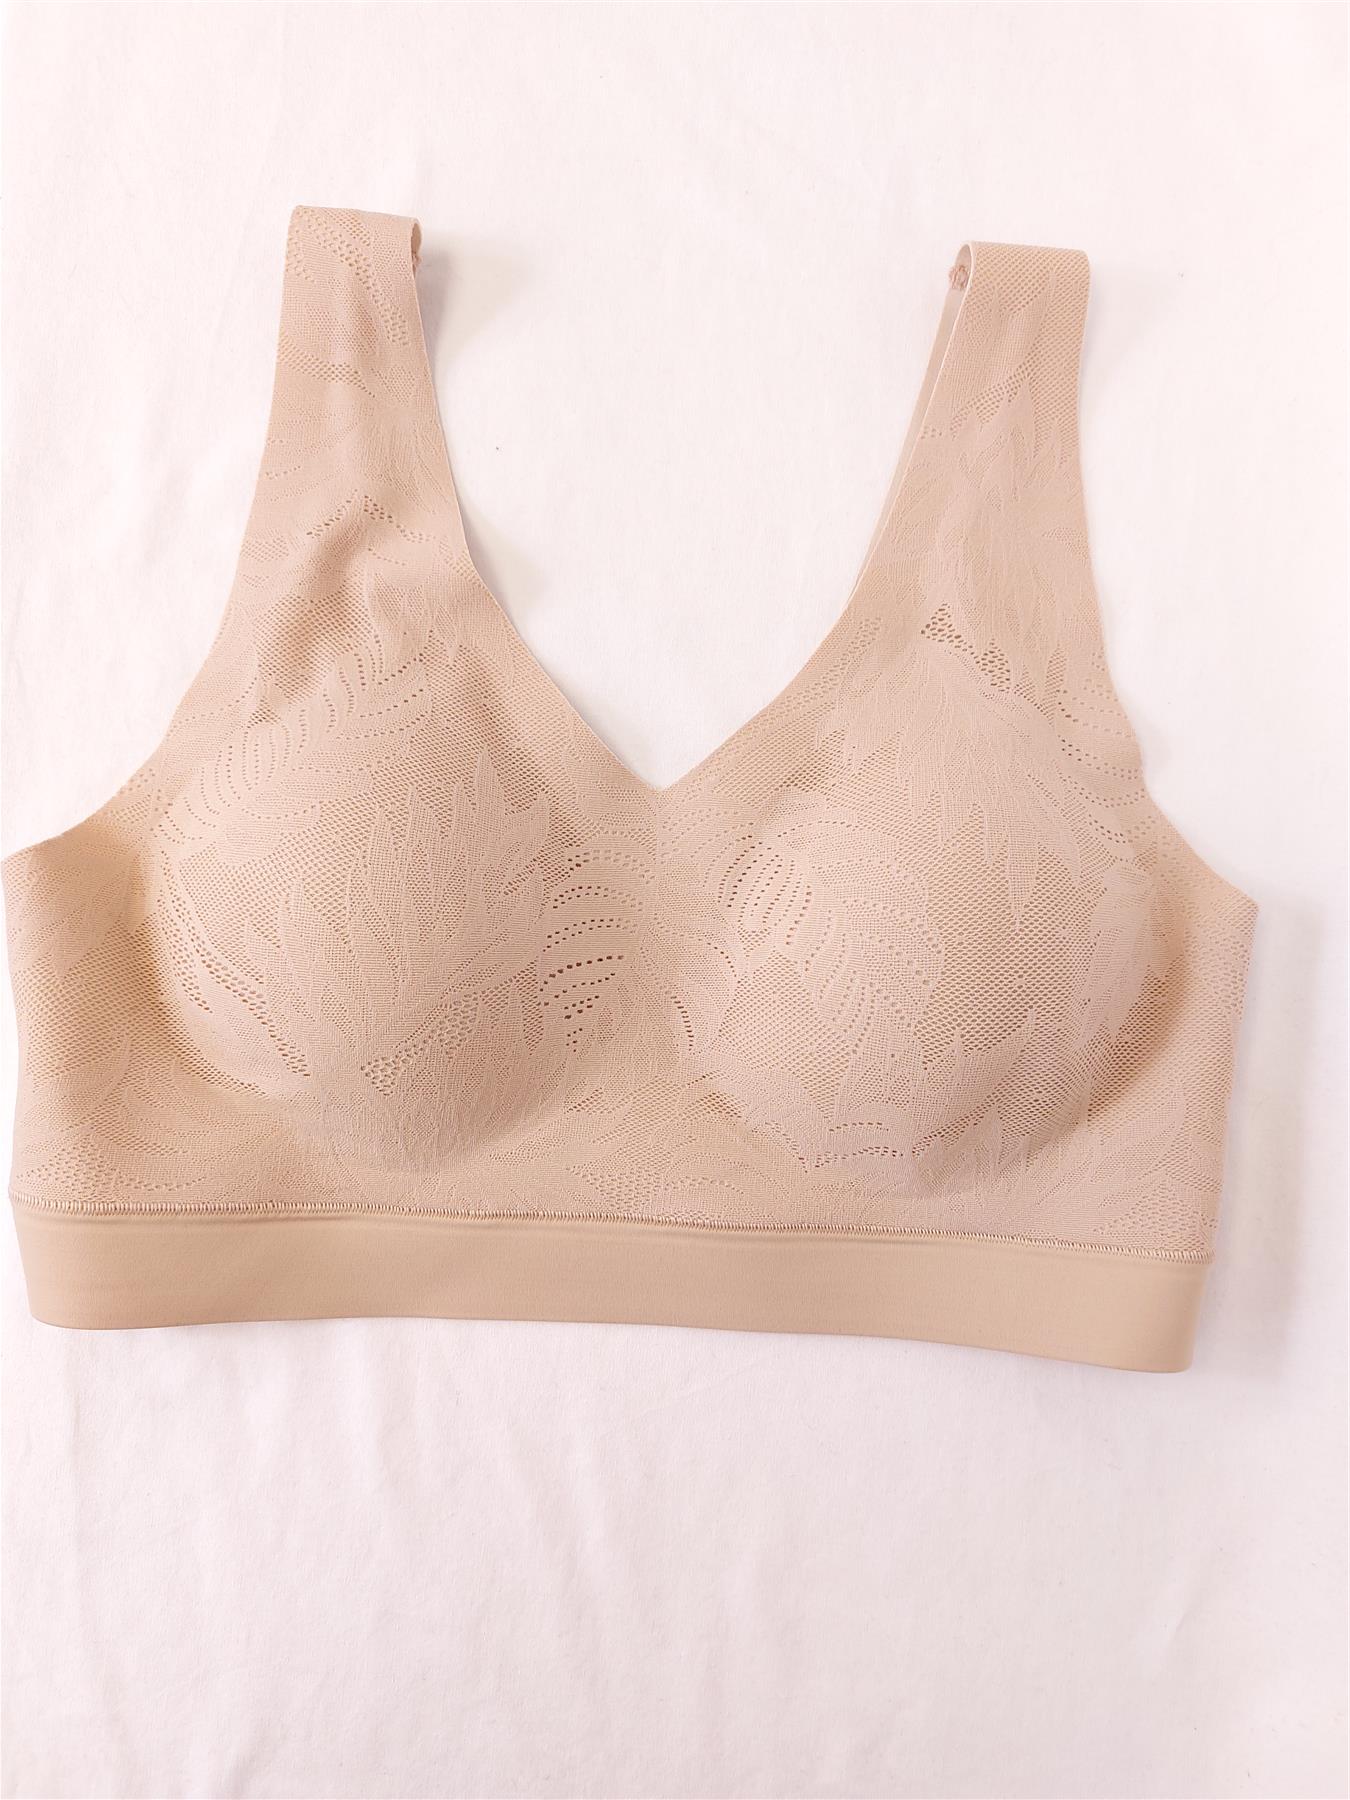 Non-Wired Crop Top Bra Lace Pattern Wire-Free Removable Pads High Street New